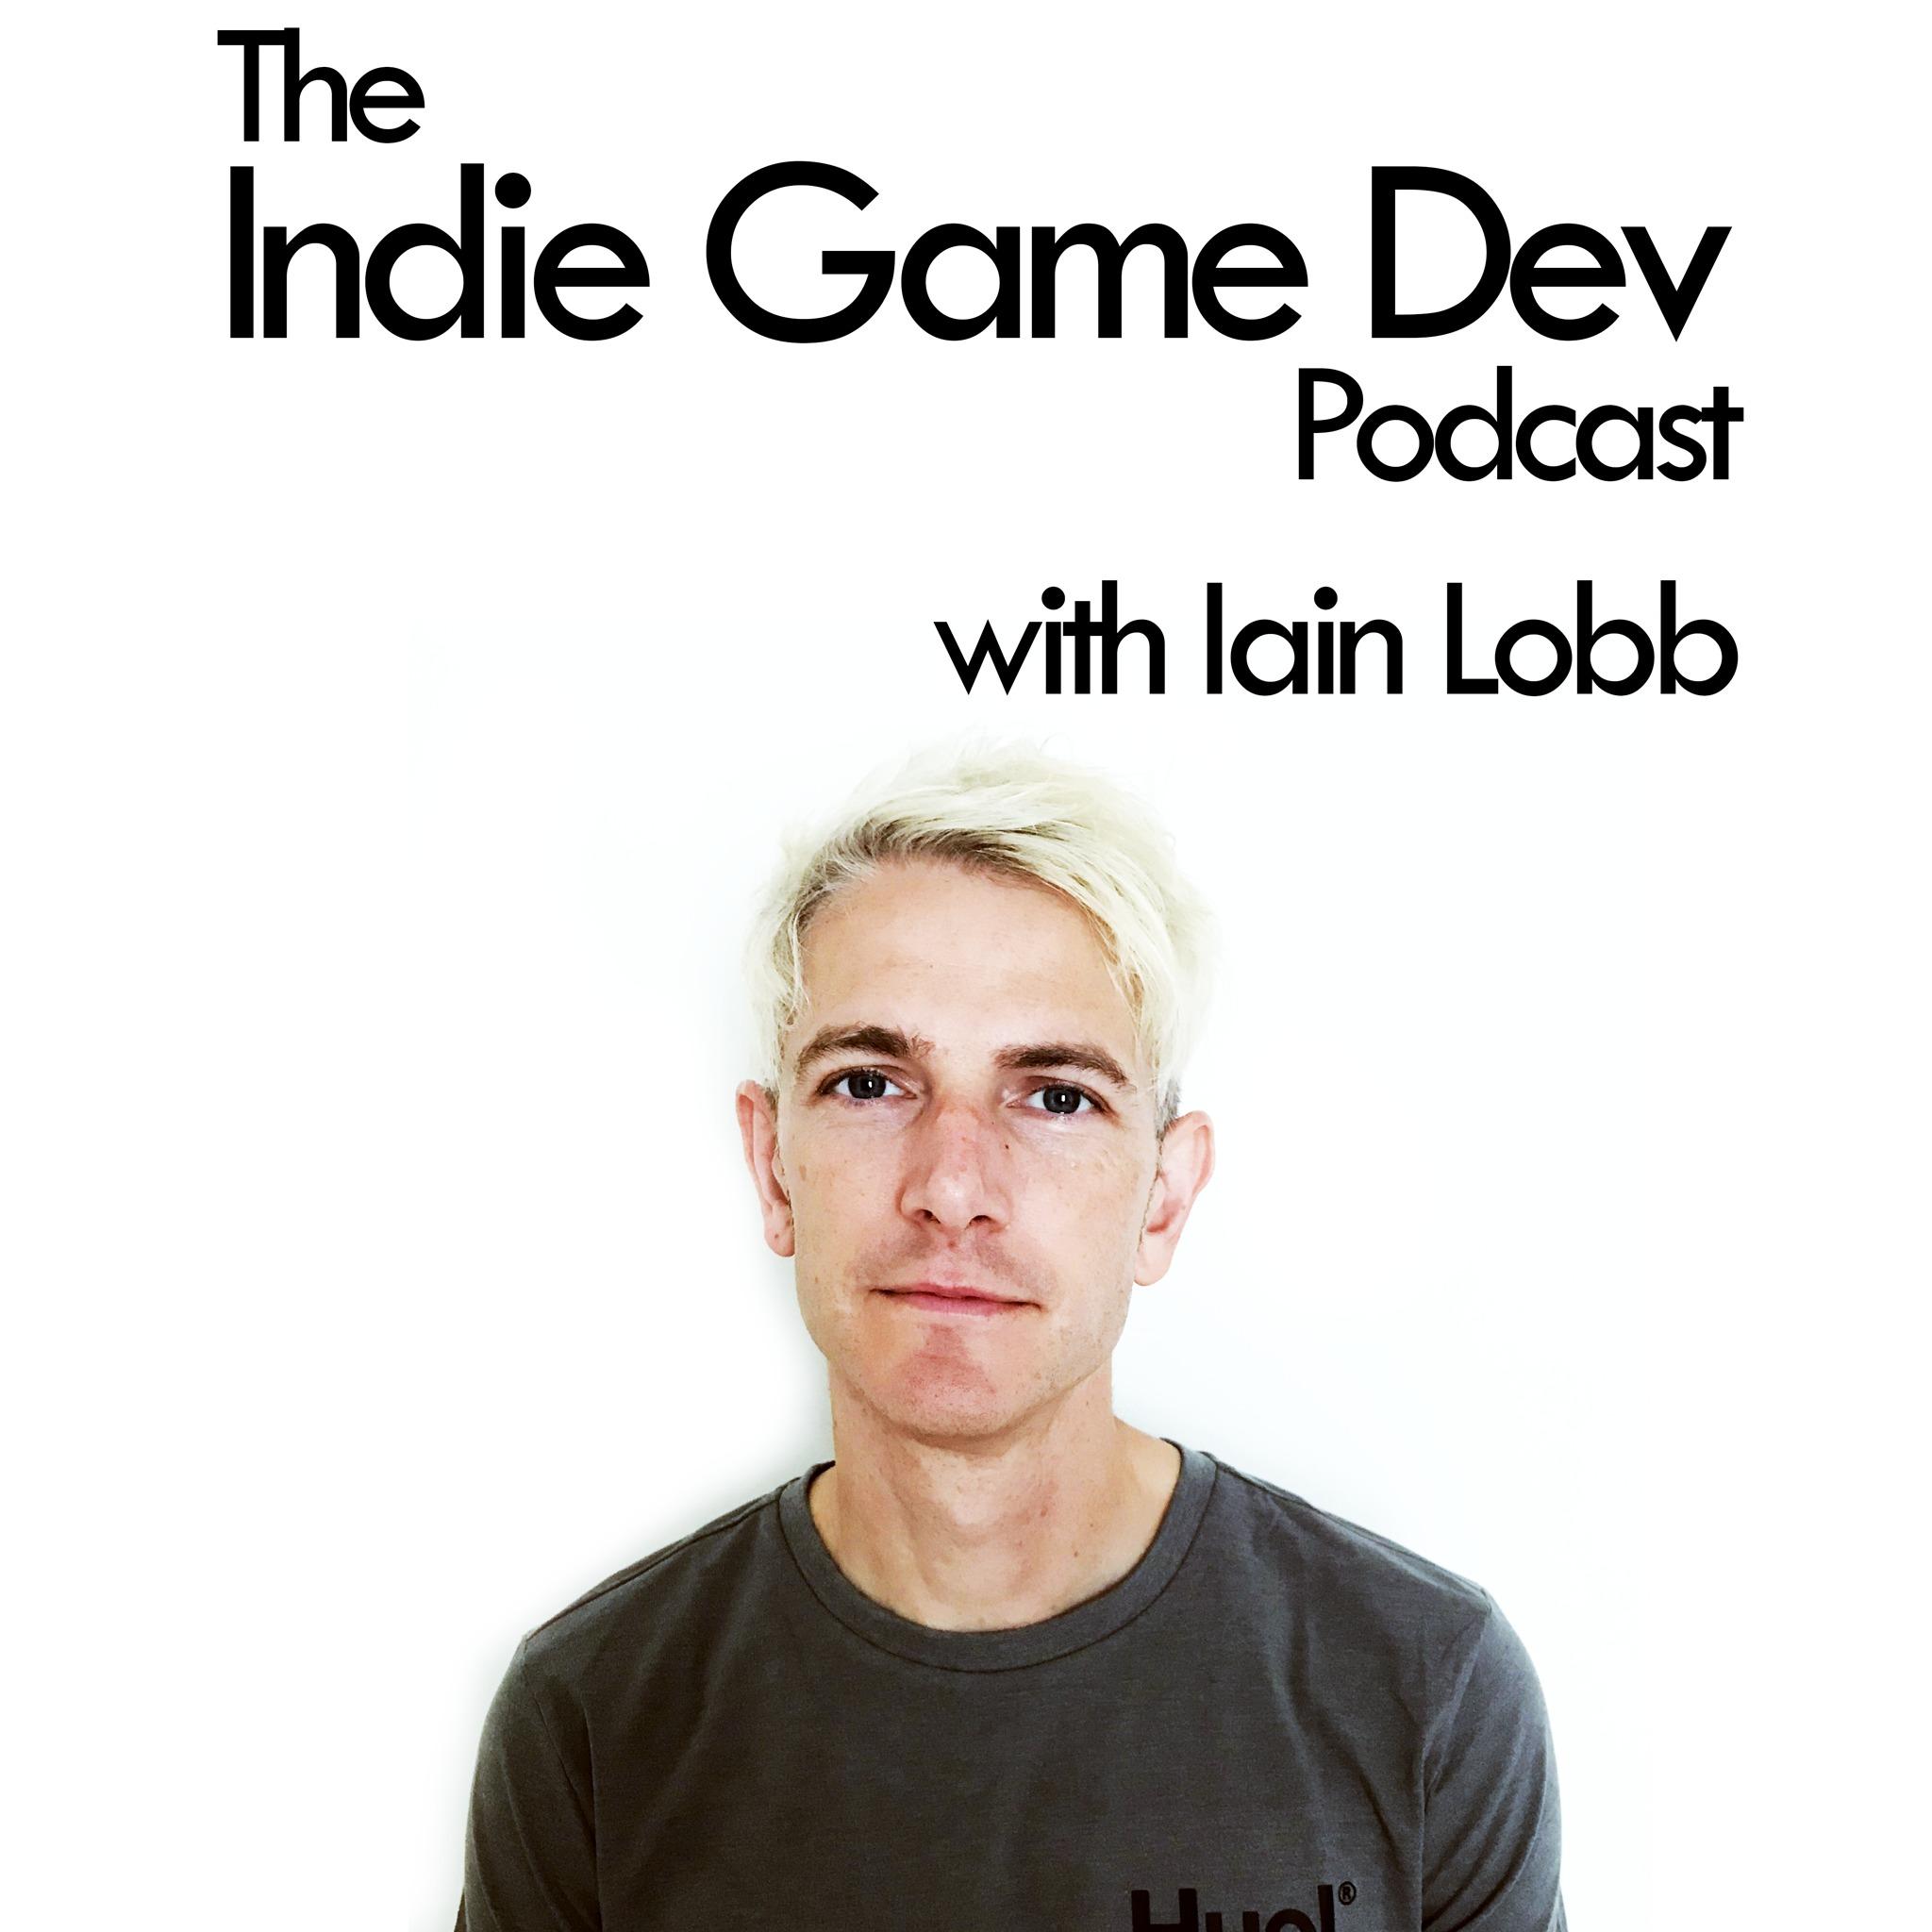 The Indie Game Dev Podcast with Iain Lobb